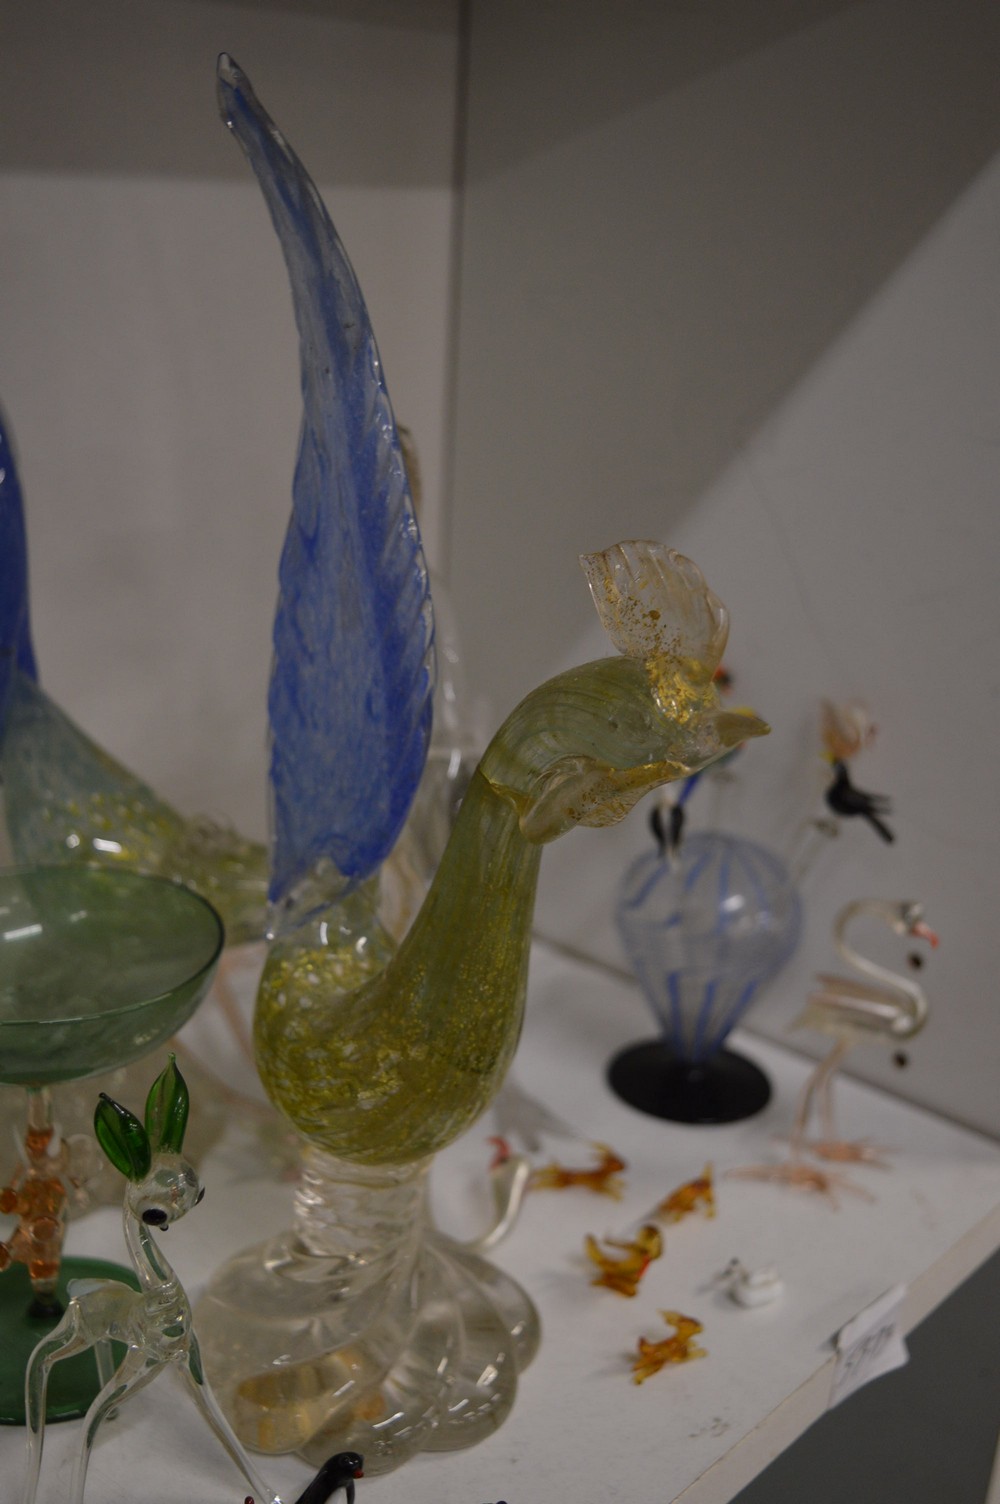 Merano glass birds and other similar items. - Image 4 of 4